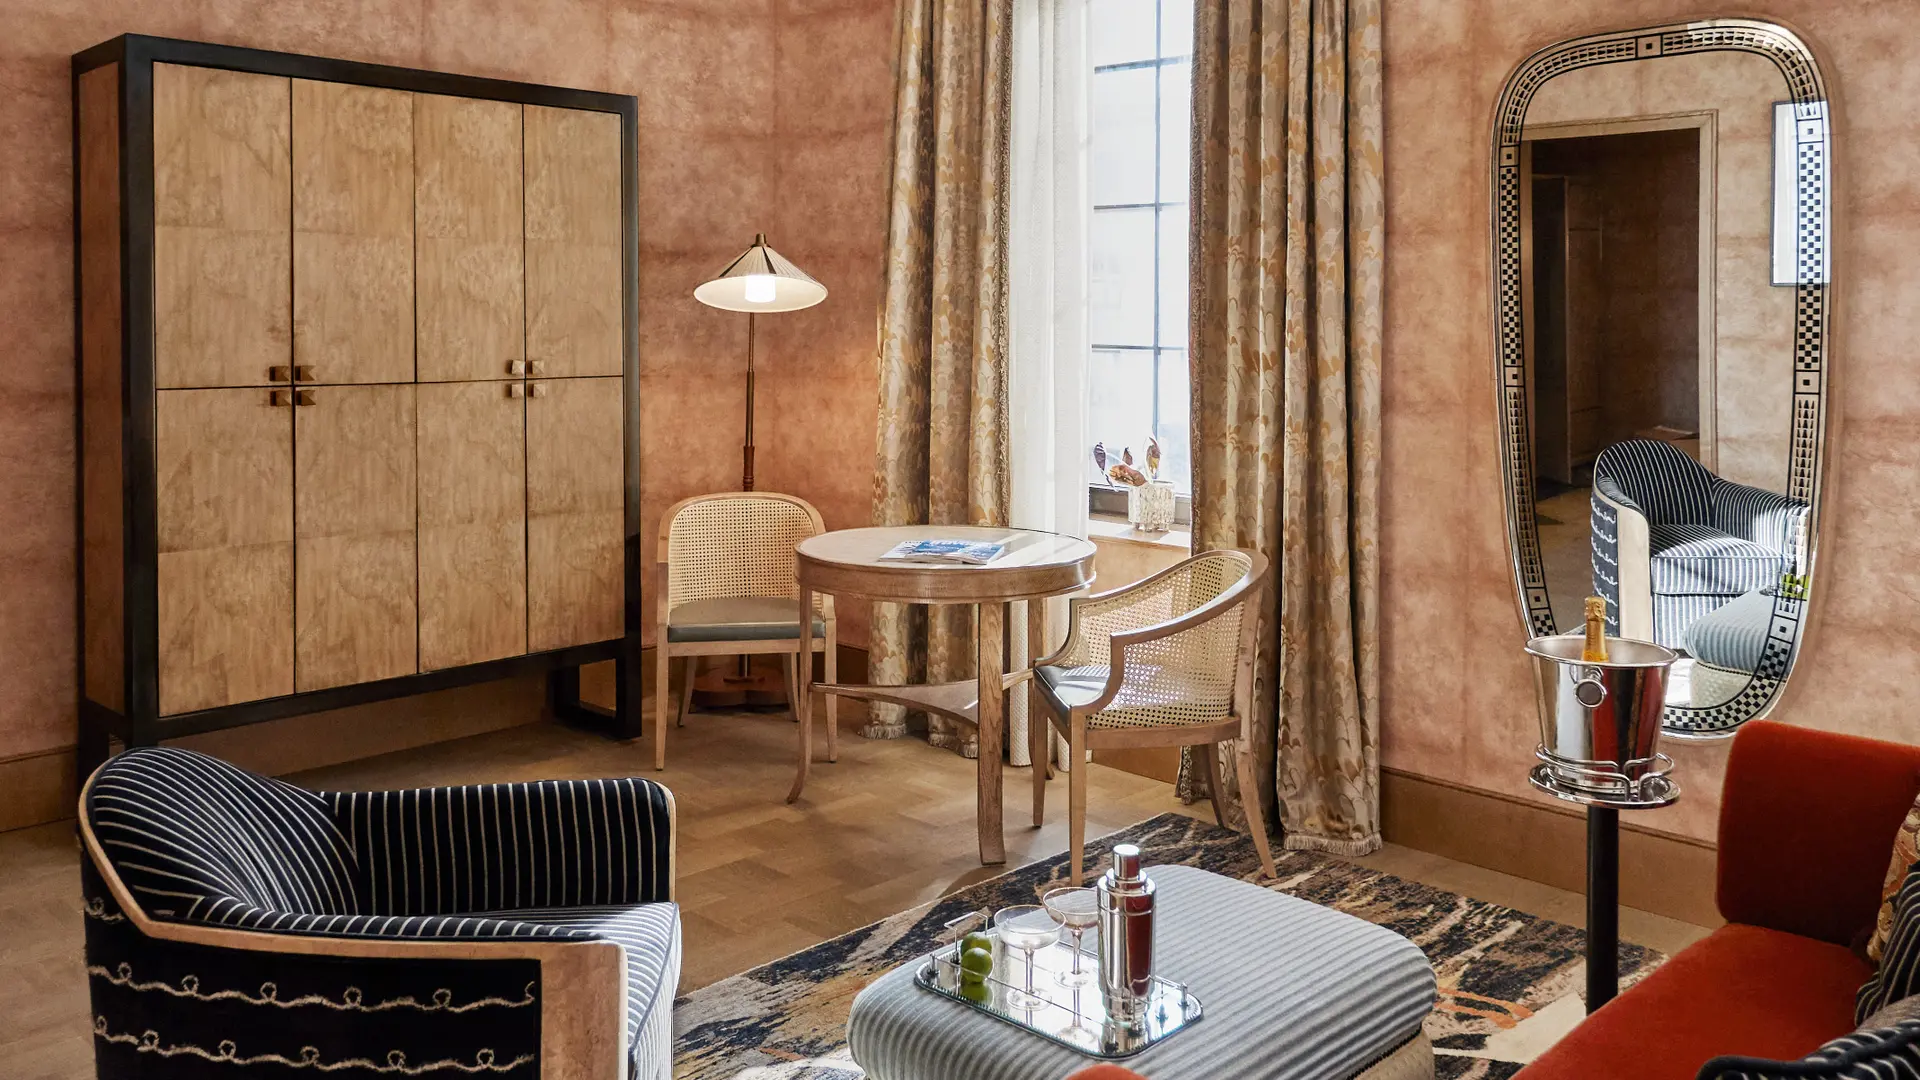 Hotels Articles - The Sommerro is set to take Oslo’s luxury hotel scene by storm